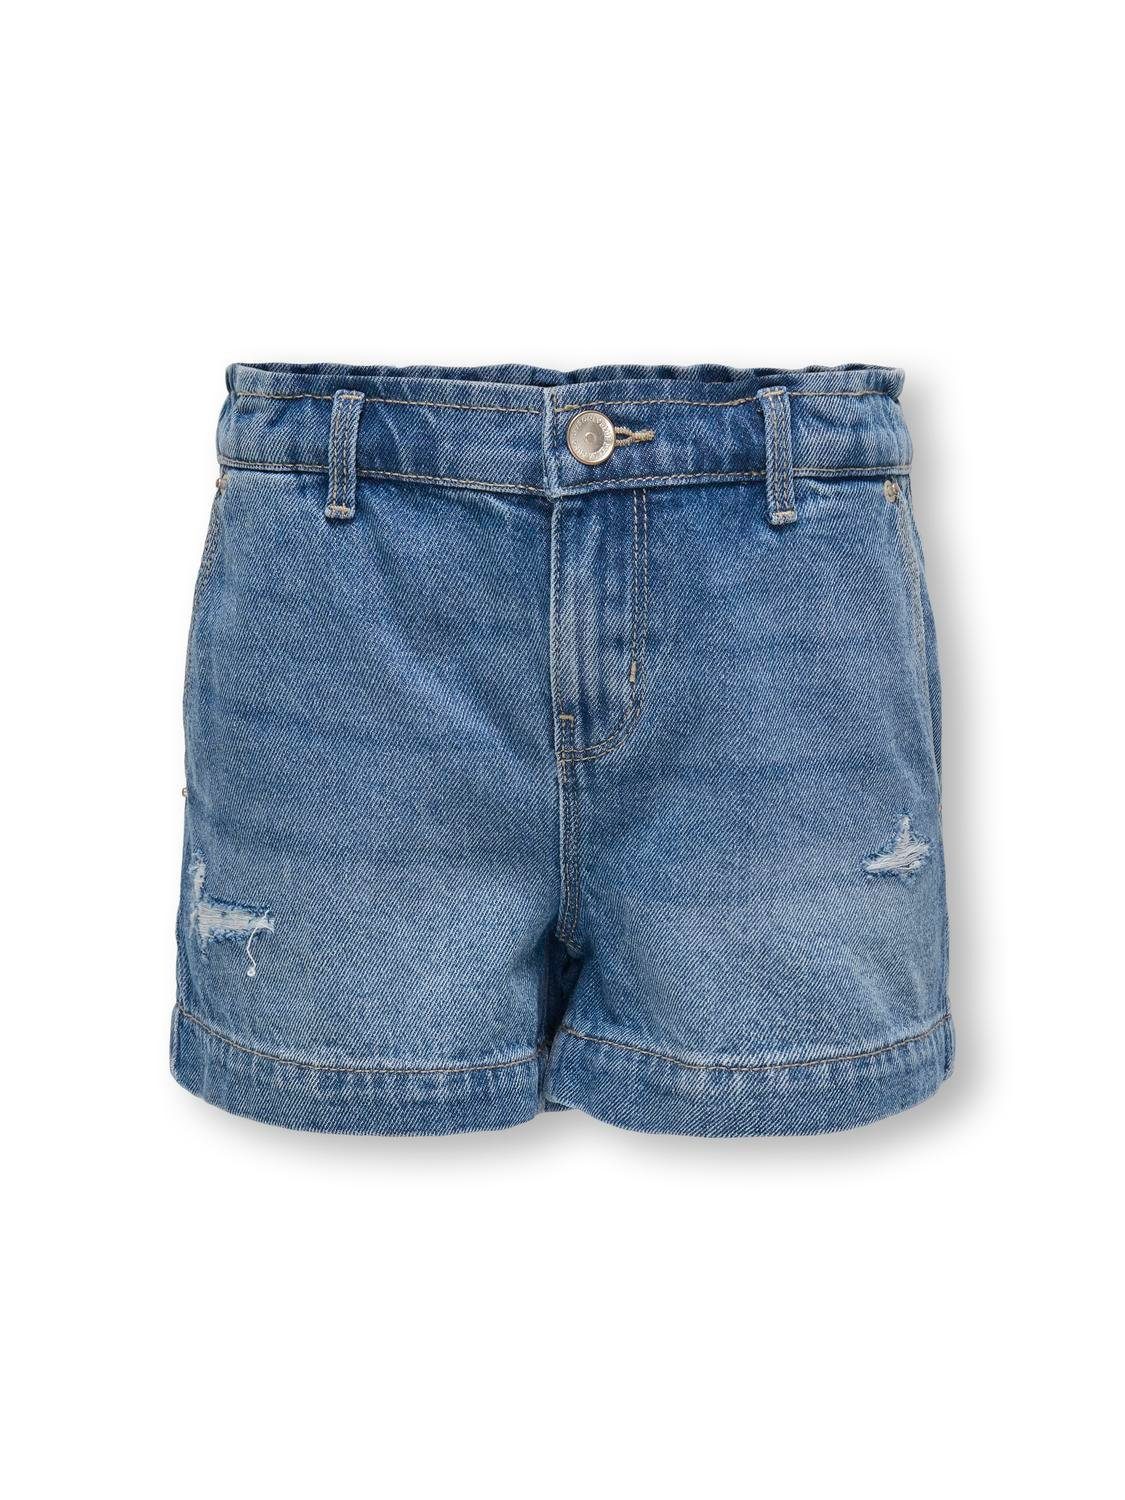 KIDS ONLY Jeansshort